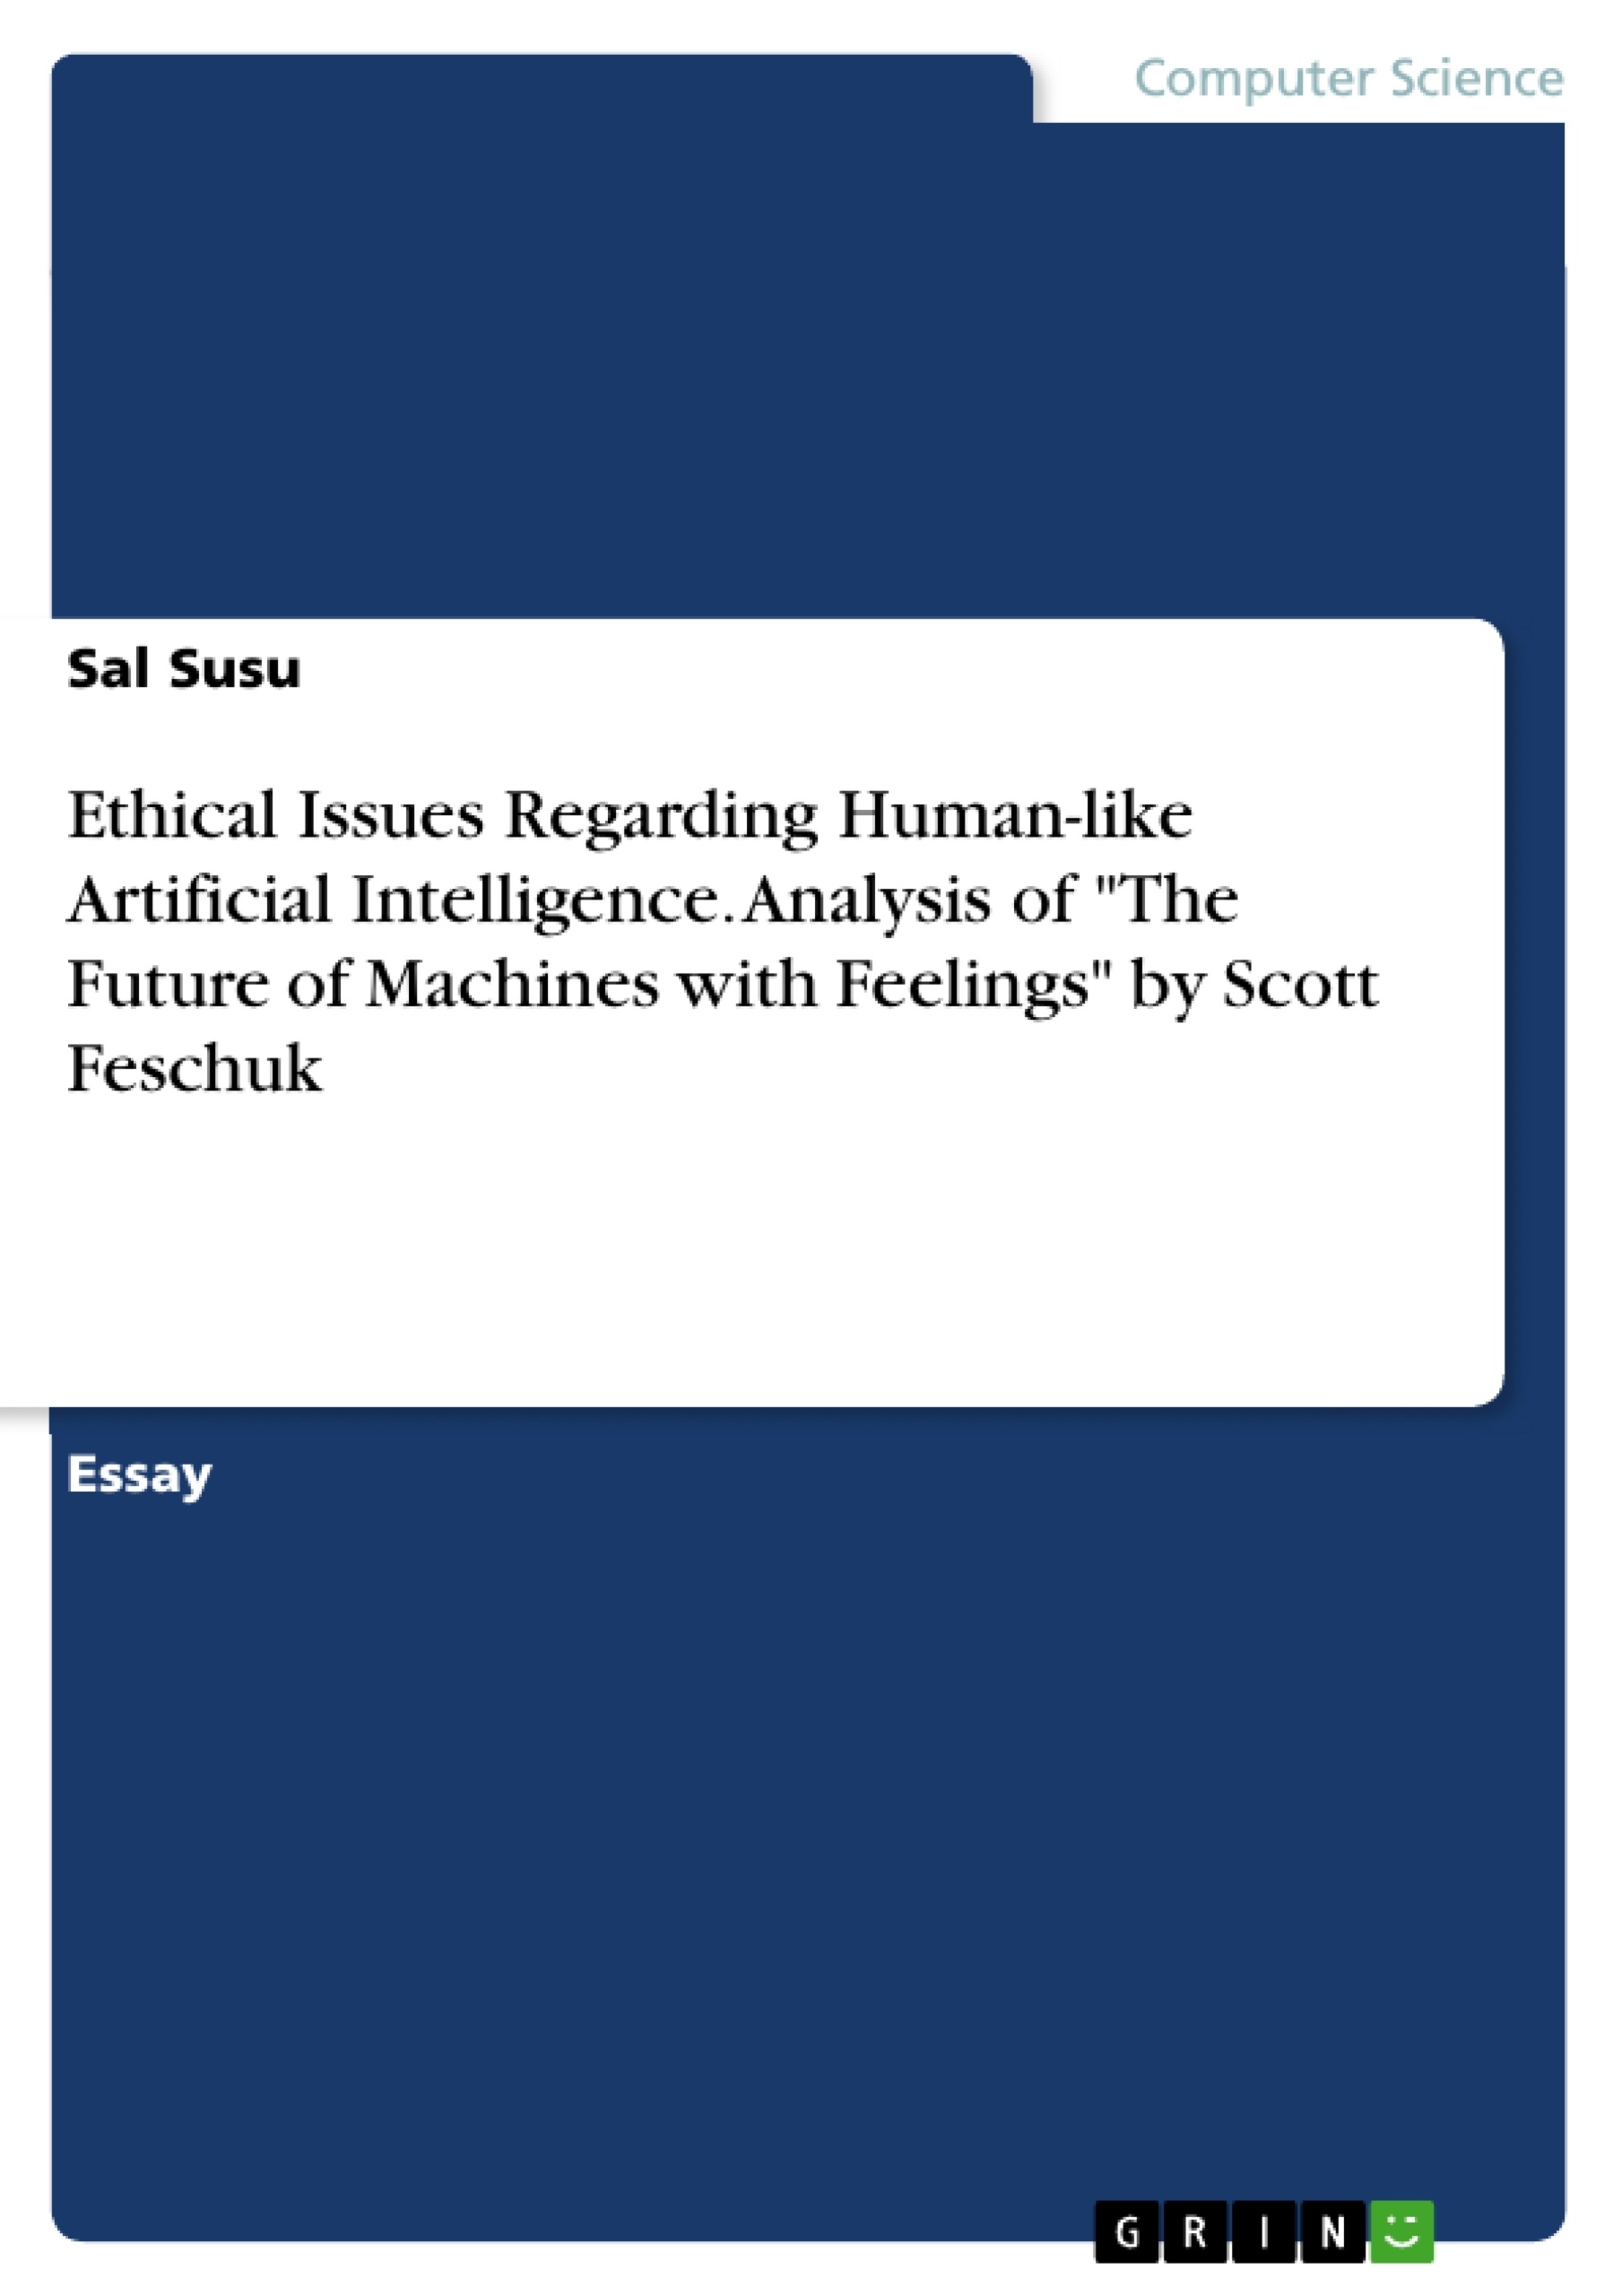 Titre: Ethical Issues Regarding Human-like Artificial Intelligence. Analysis of "The Future of Machines with Feelings" by Scott Feschuk